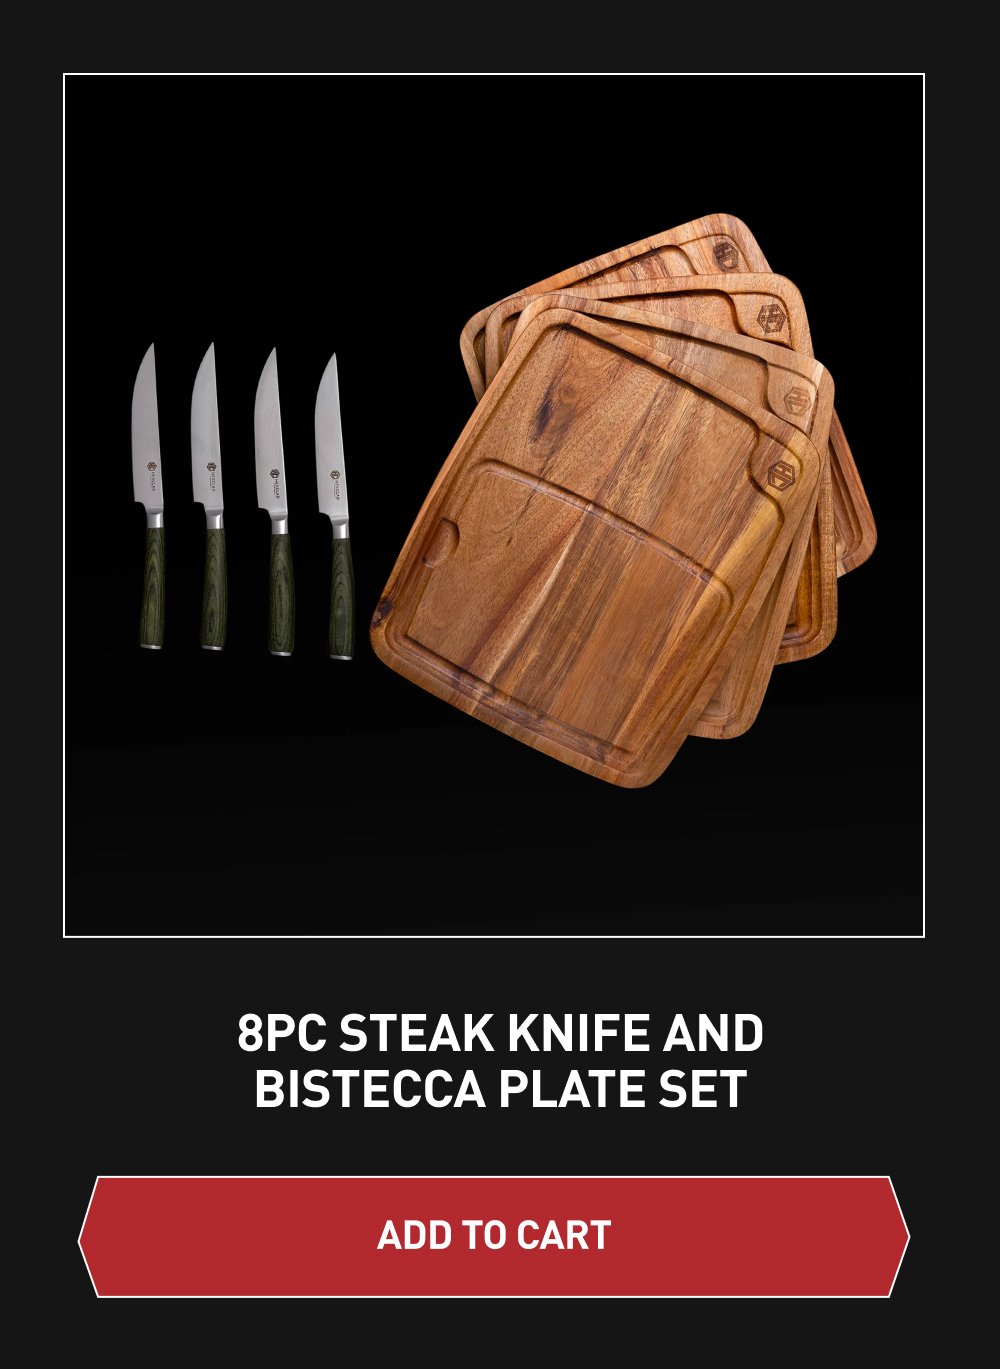 8PC Steak Knife and Bistecca Plate Set [ADD TO CART]